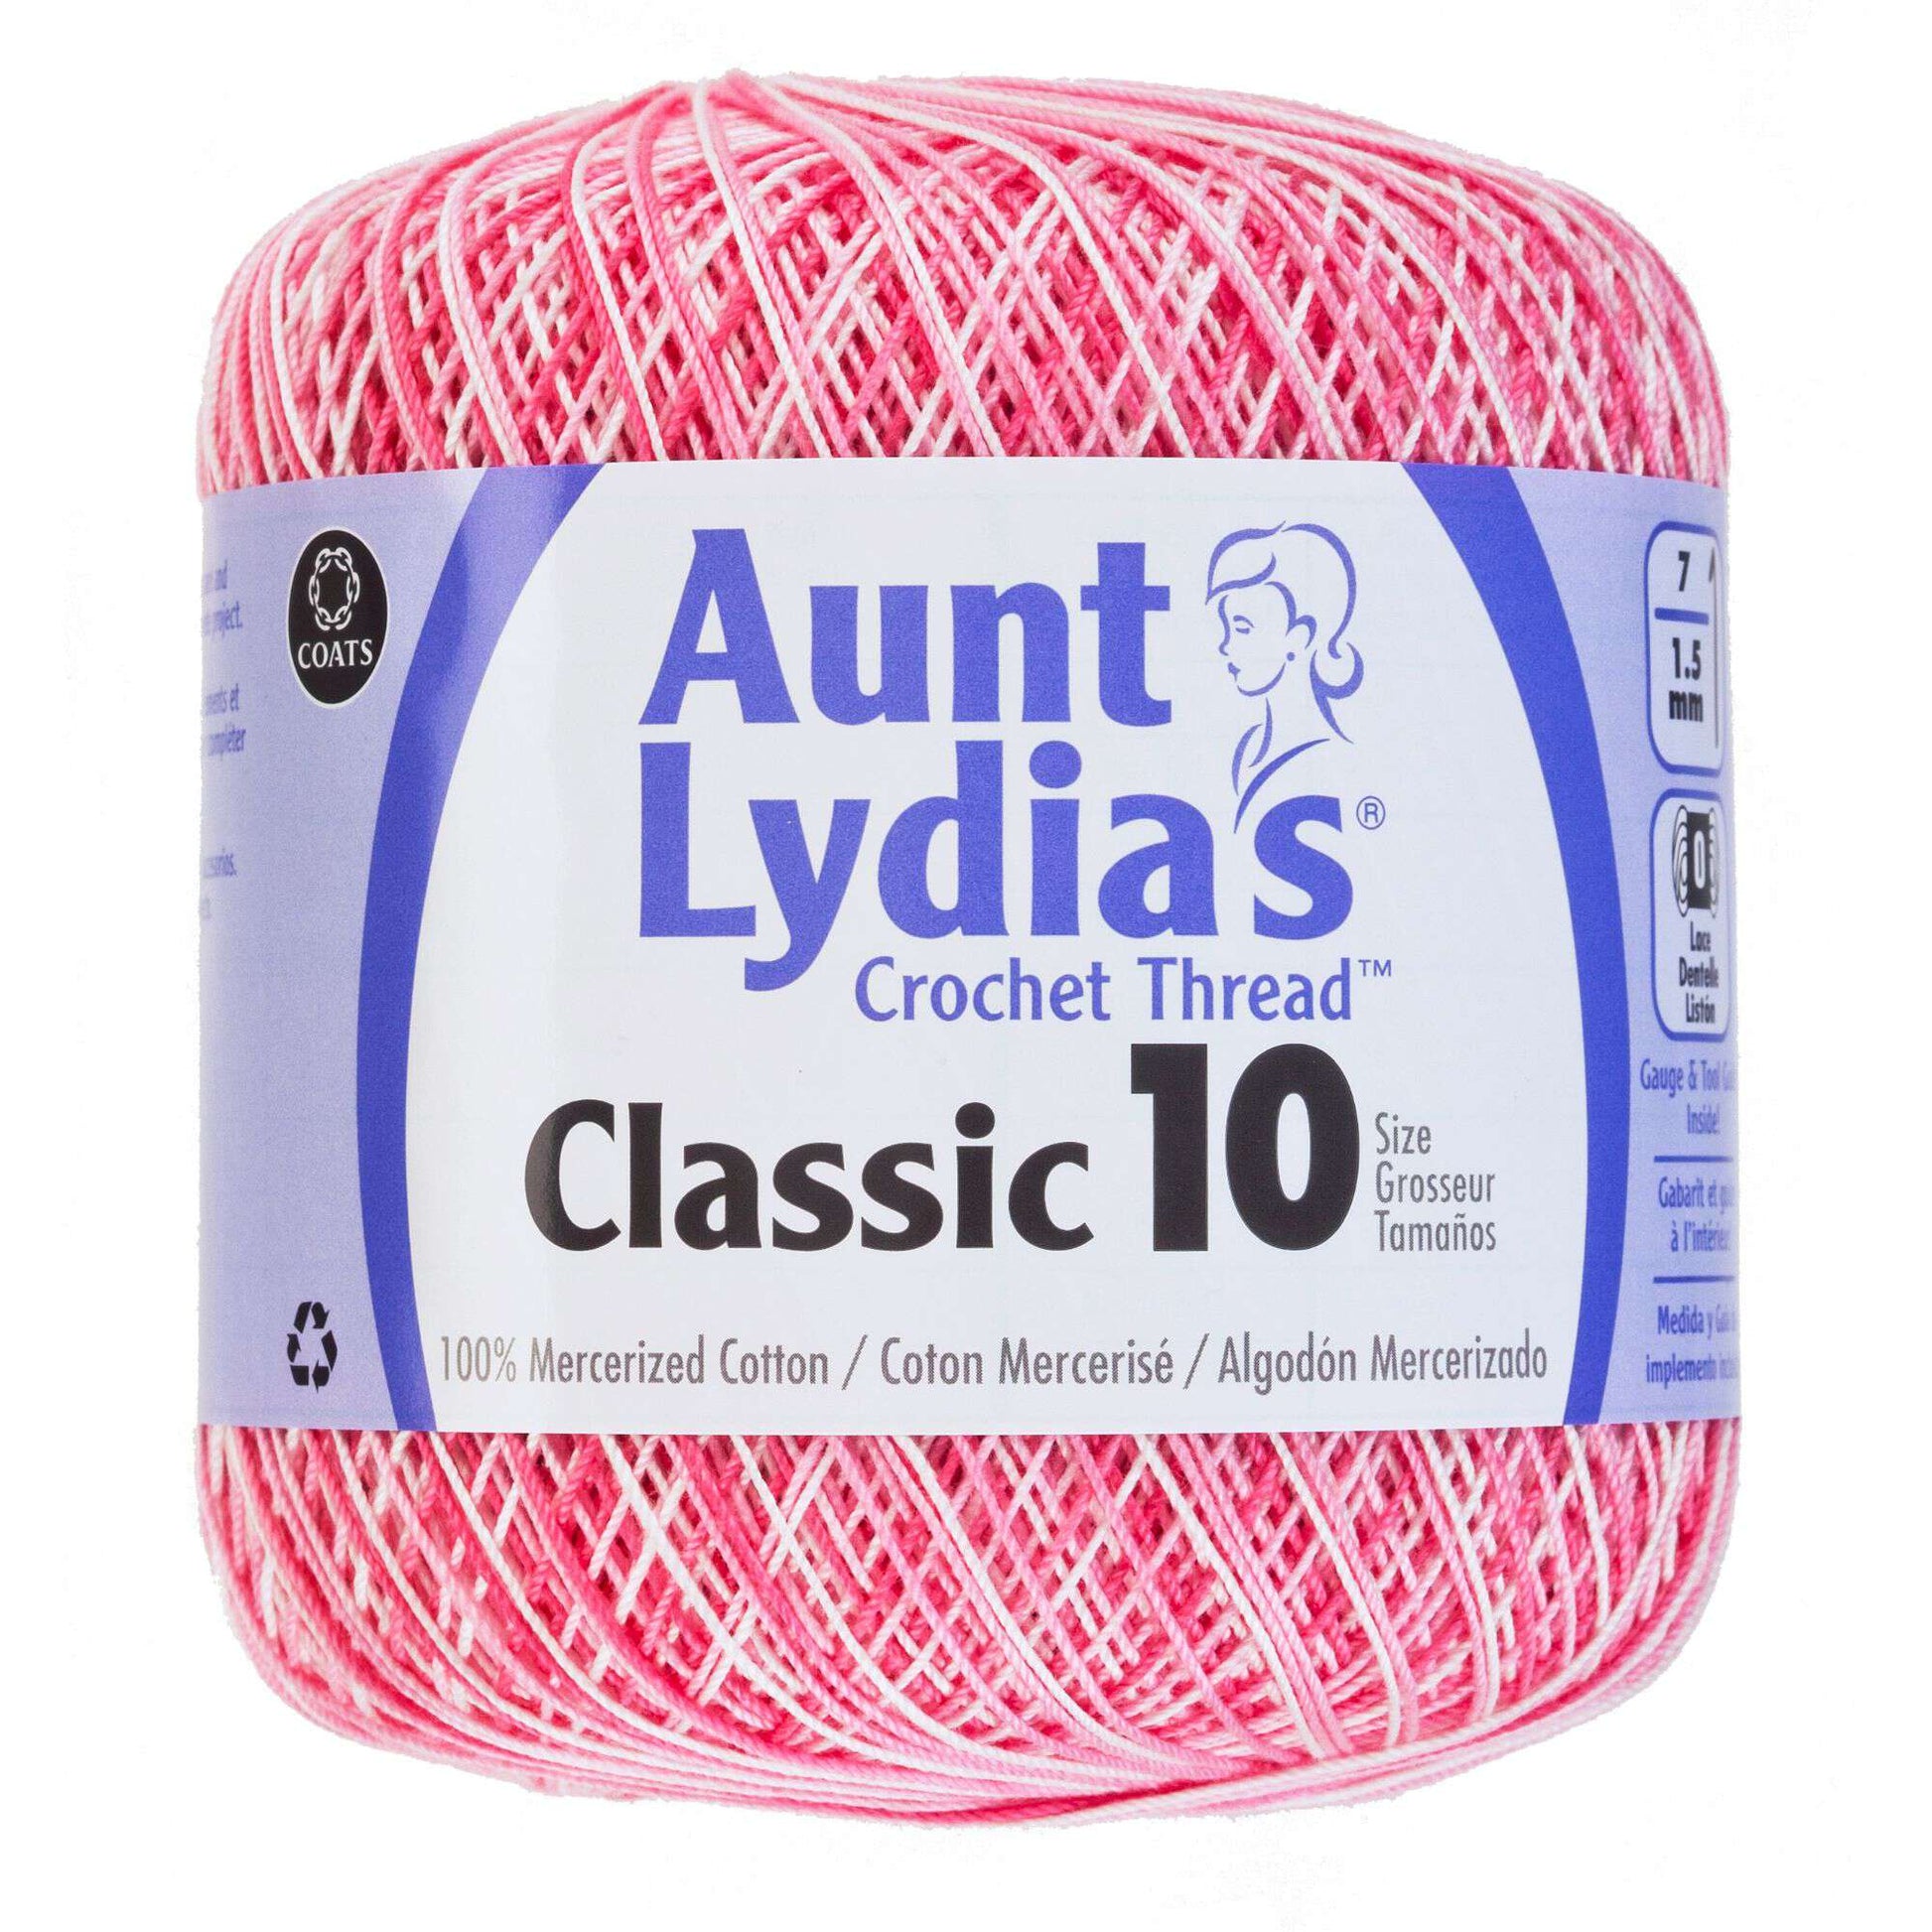 Aunt Lydia's Classic Crochet Thread Size 10 Shaded Pinks